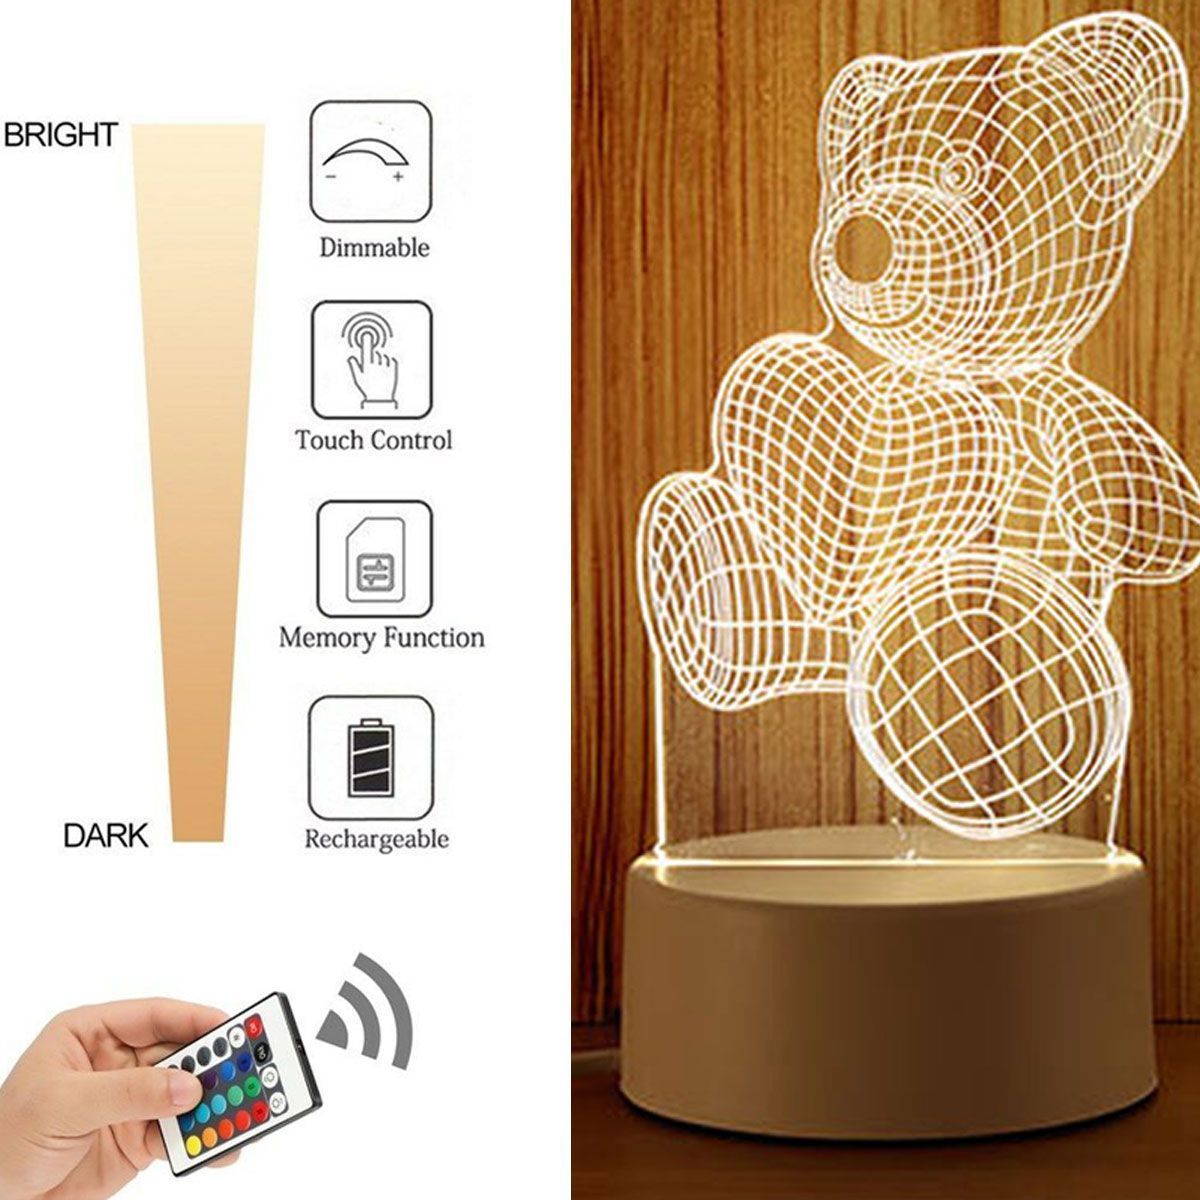 3D-LED-Table-Kid-Night-Light-Lamp-16-Color-USB-Bedroom-Child-Christmas-Gift-Remote-Control-1727573